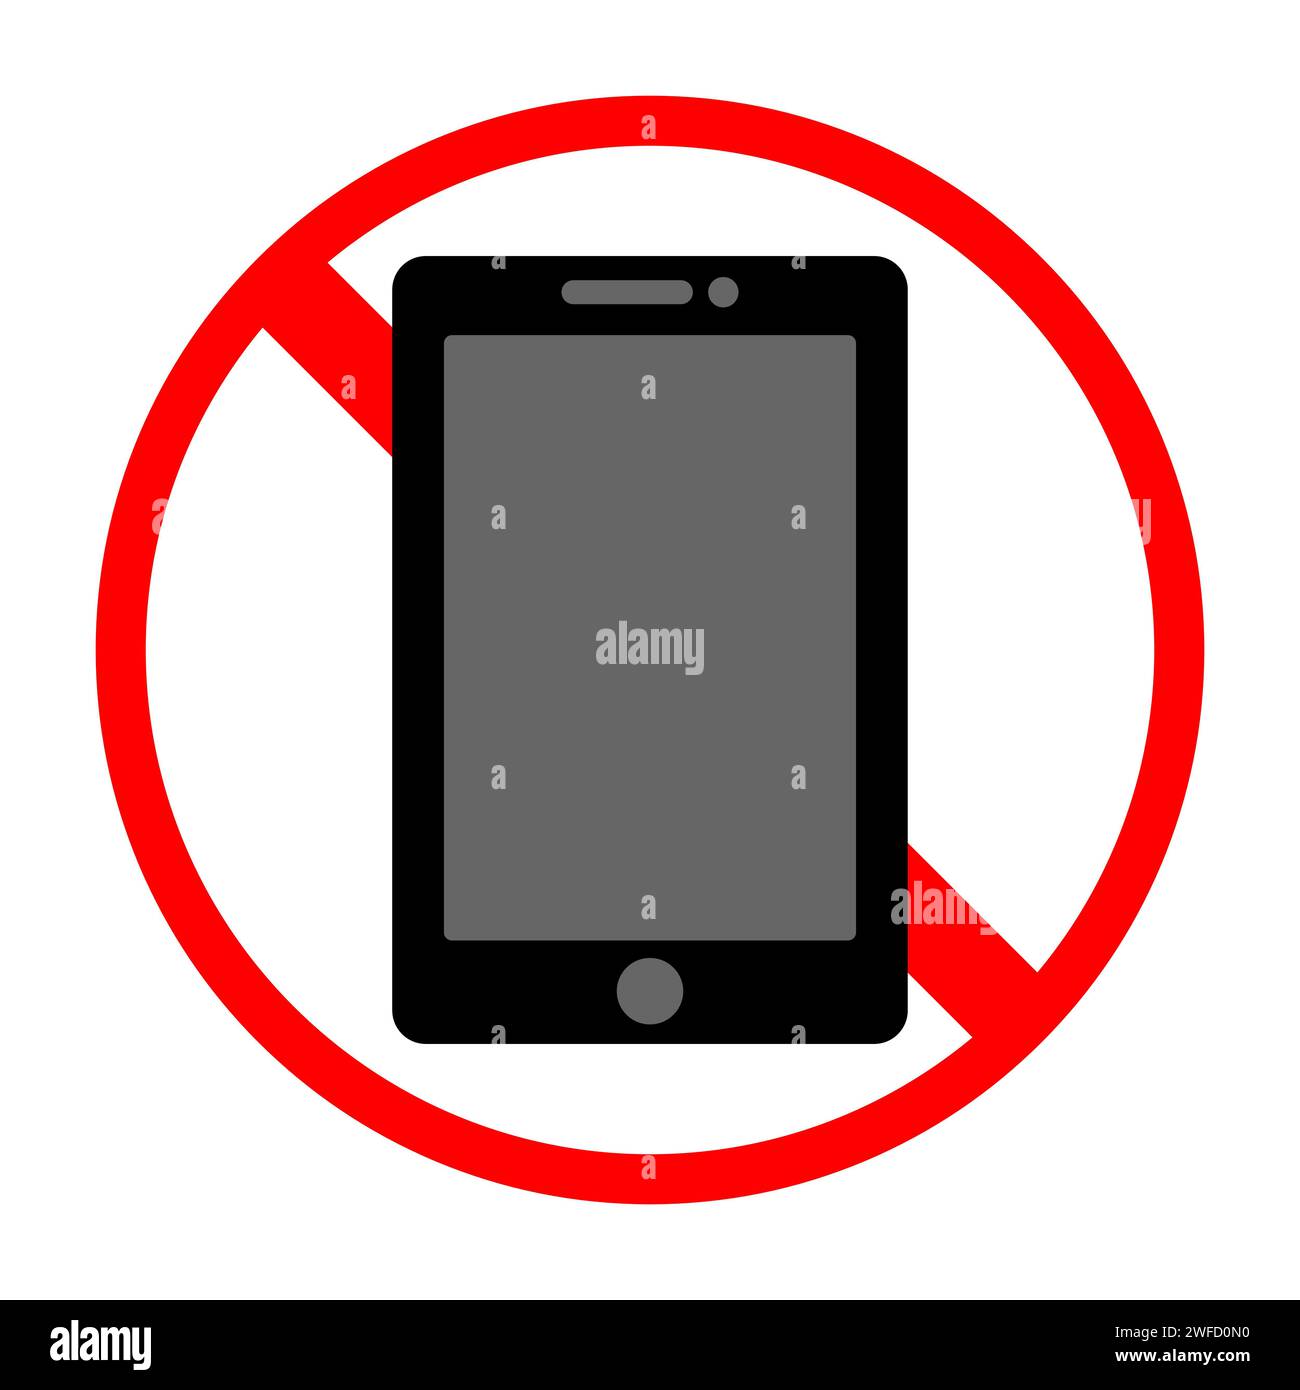 No phone symbol. Red circle. Colored sign. Forbidden symbol. Gadget element. Flat style. Vector illustration. Stock image. EPS 10. Stock Vector